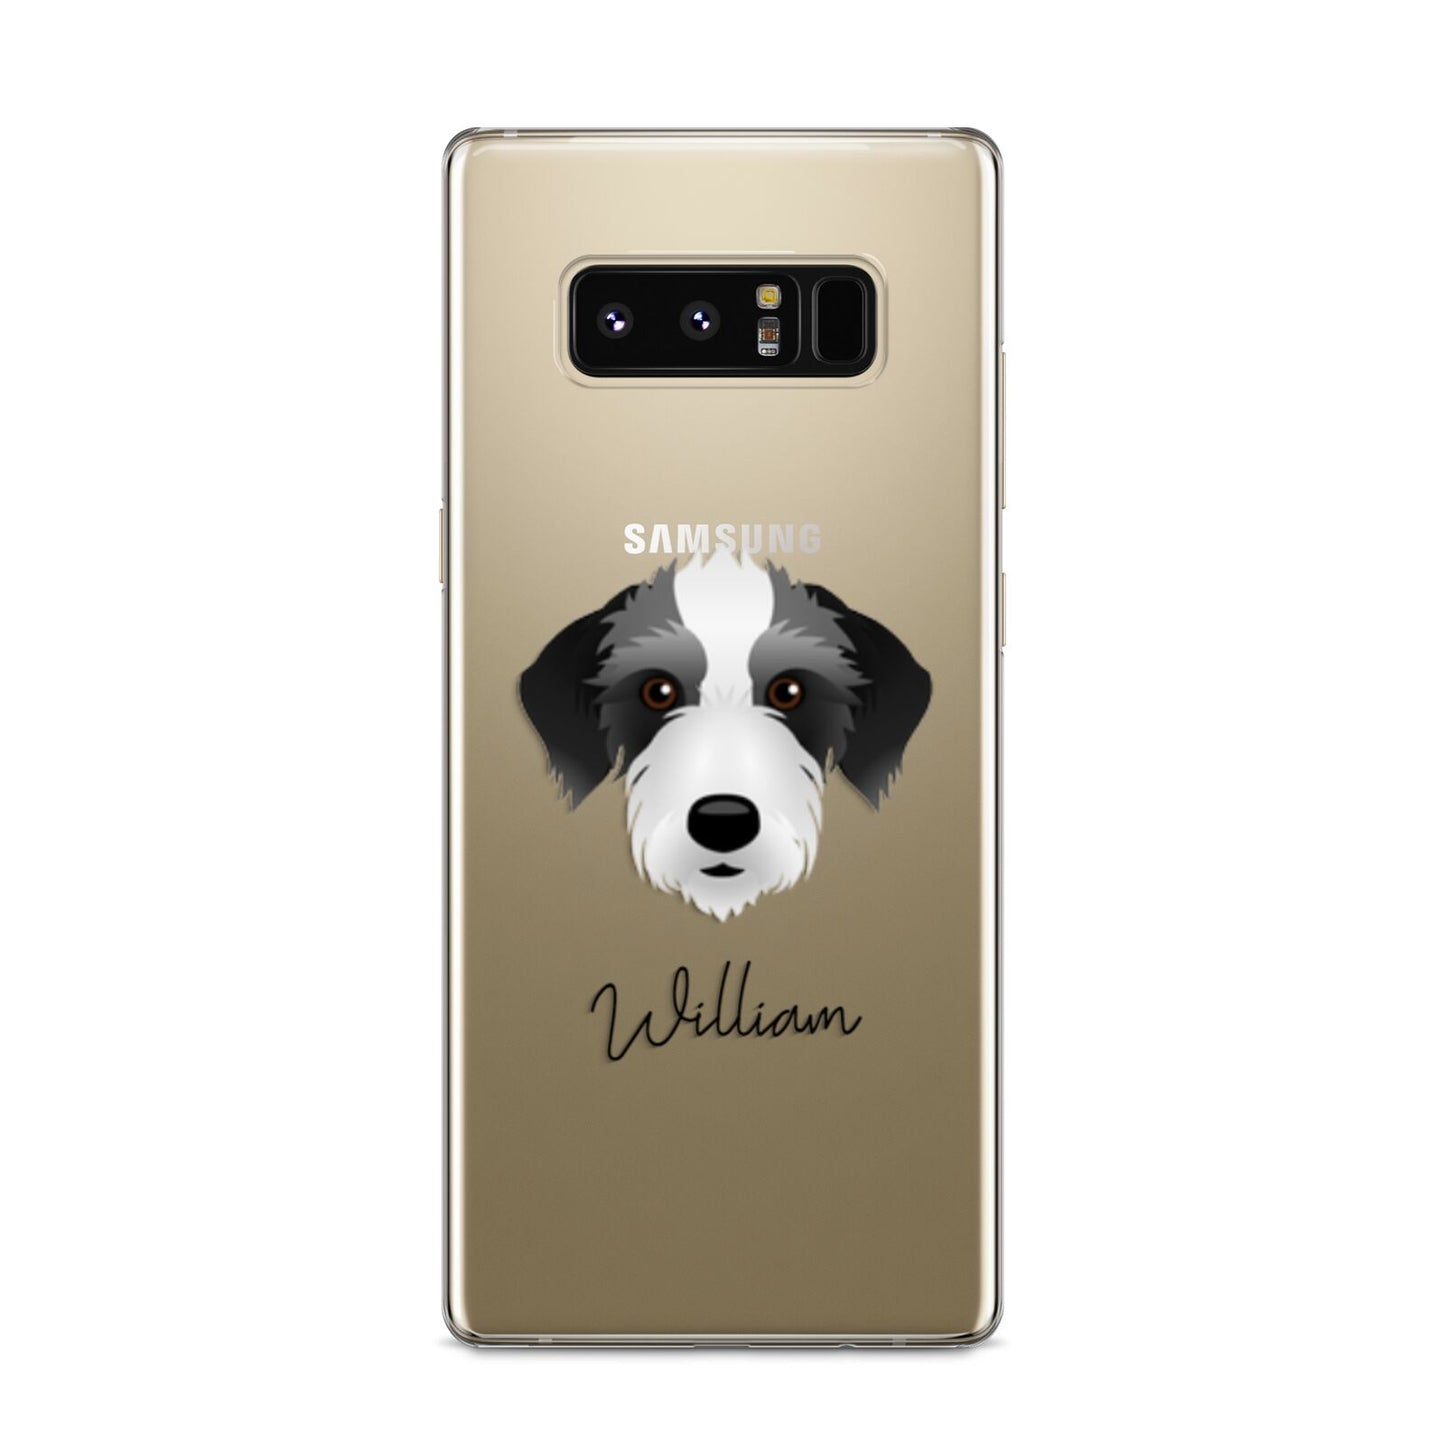 Bedlington Whippet Personalised Samsung Galaxy S8 Case